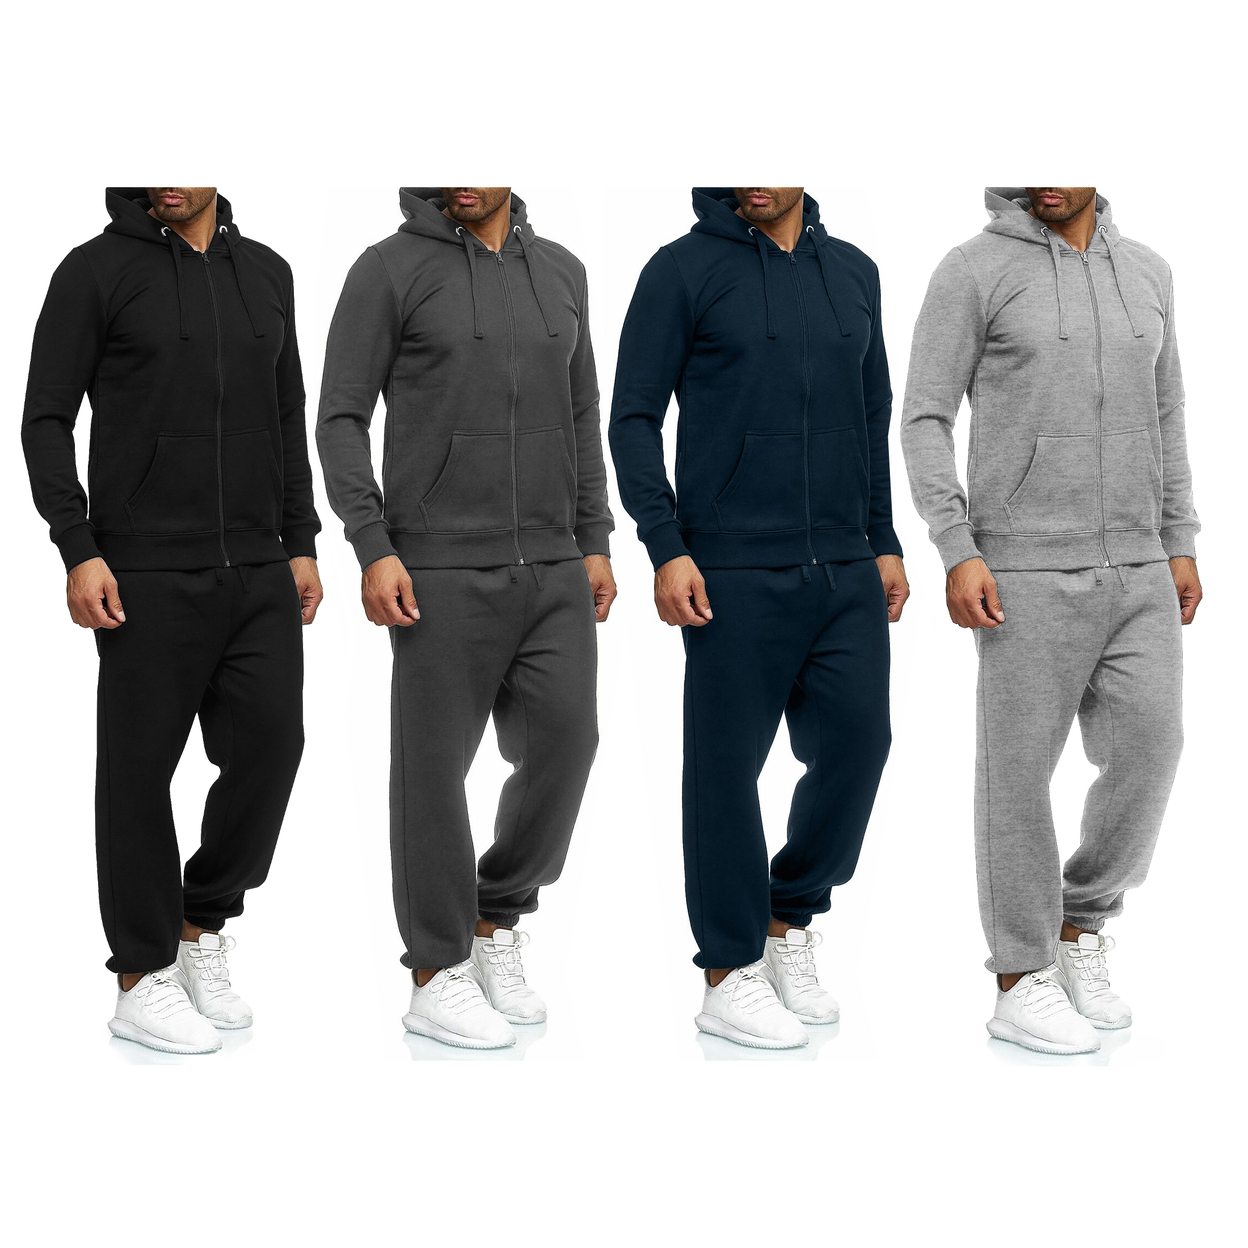 2-Pack: Men's Casual Big & Tall Athletic Active Winter Warm Fleece Lined Full Zip Tracksuit Jogger Set - Charcoal, Small